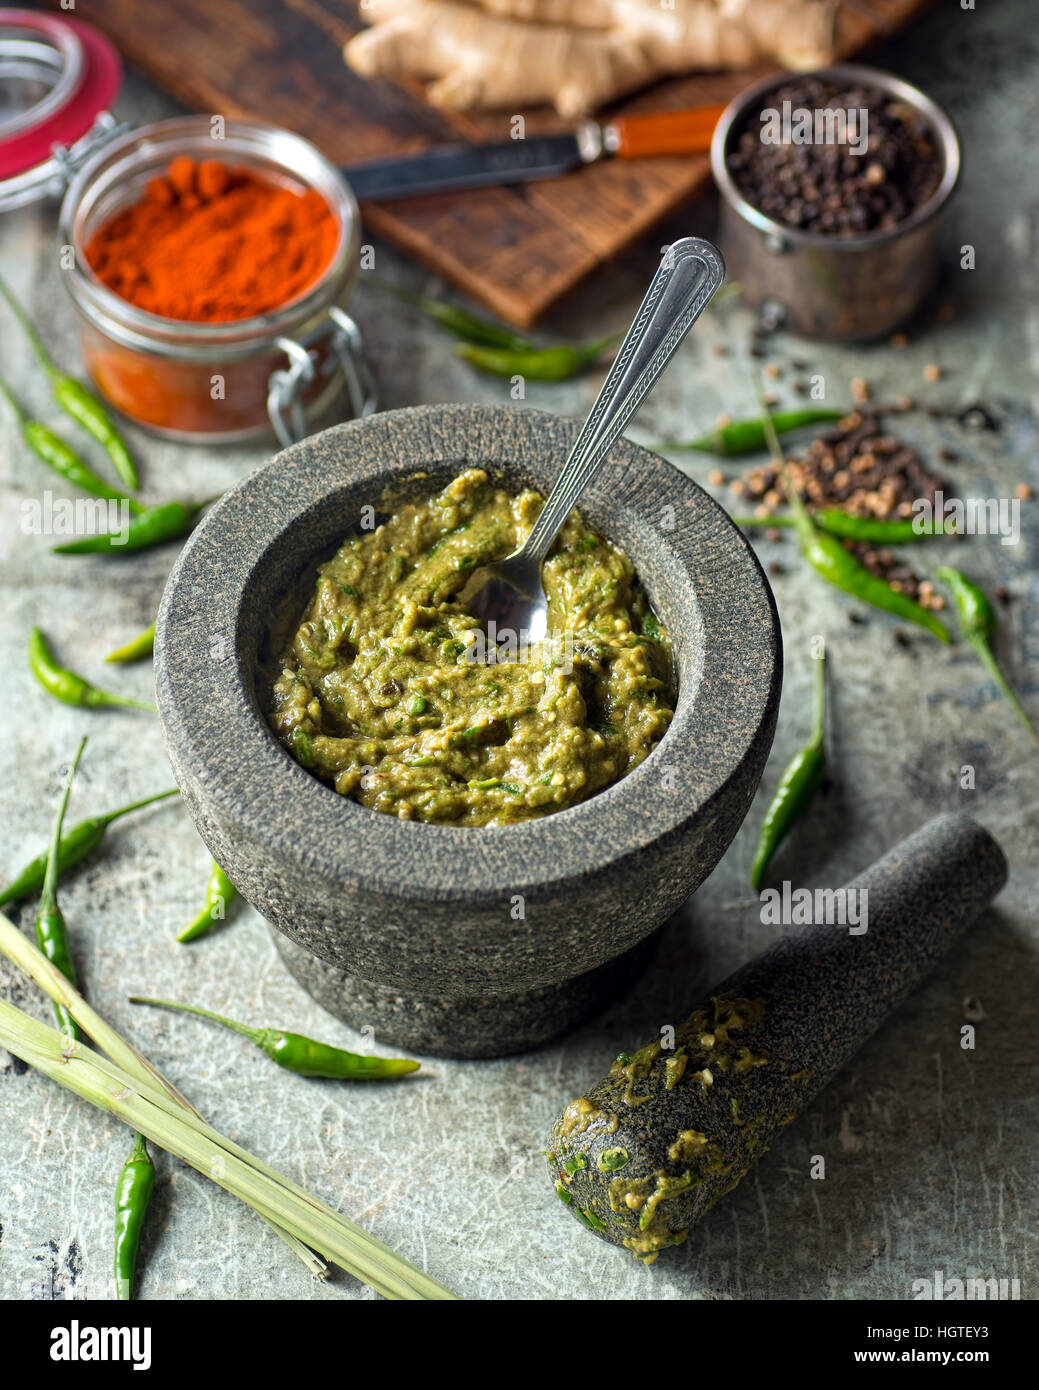 A delicious Thai green curry paste with mortar and pestle. Stock Photo